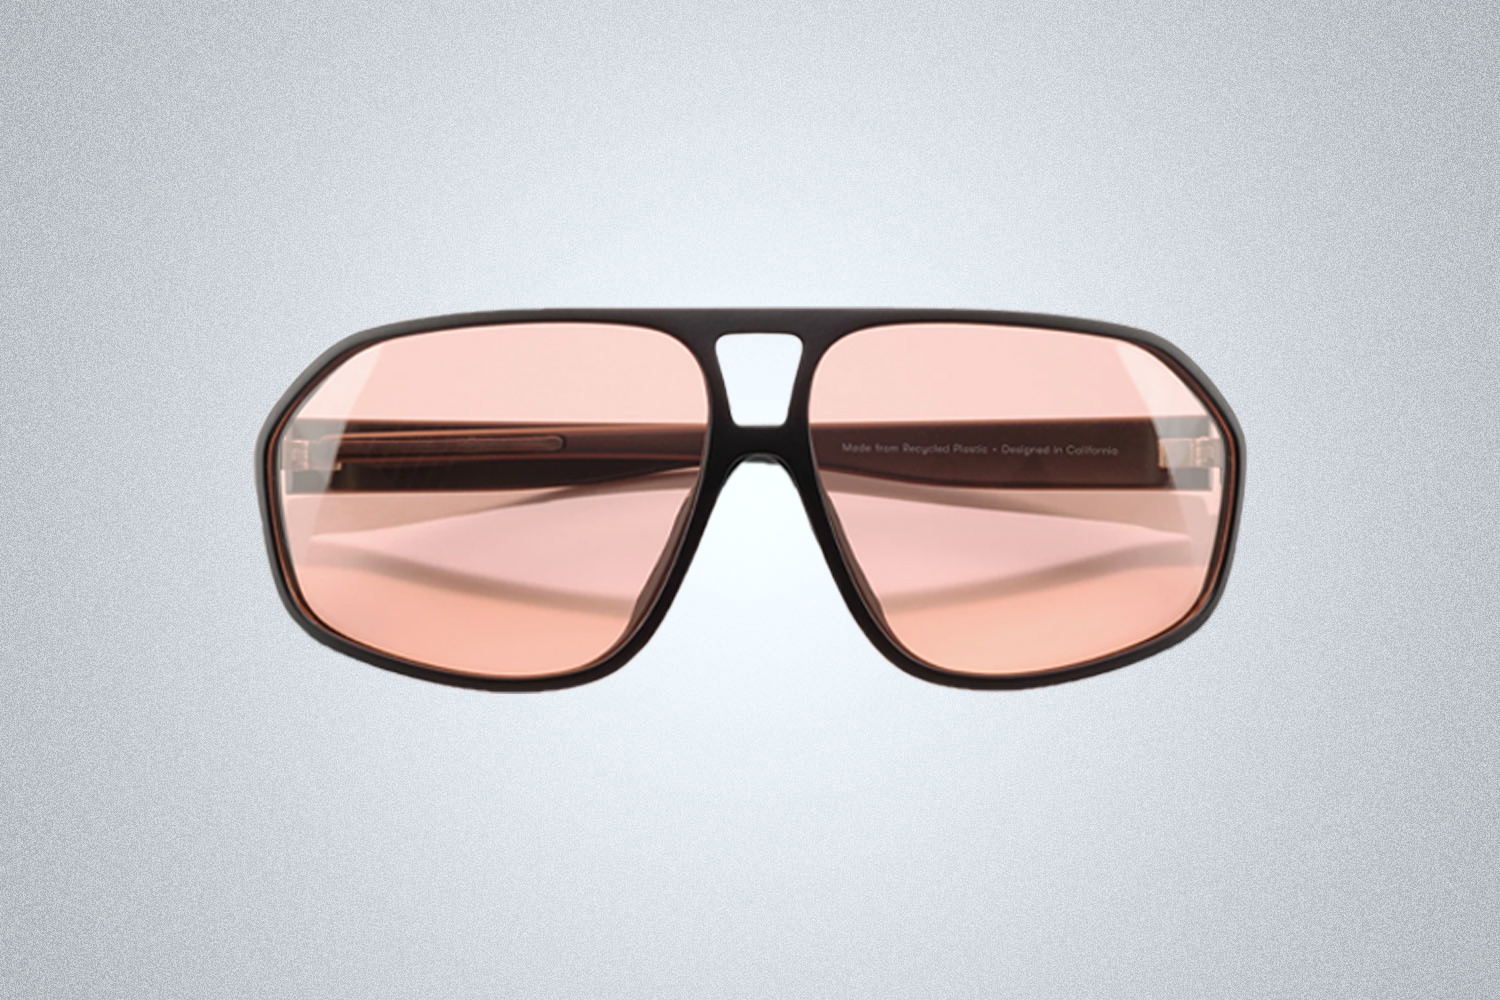 The Sunski Velo is a great, bold stylish choice of shades for summer